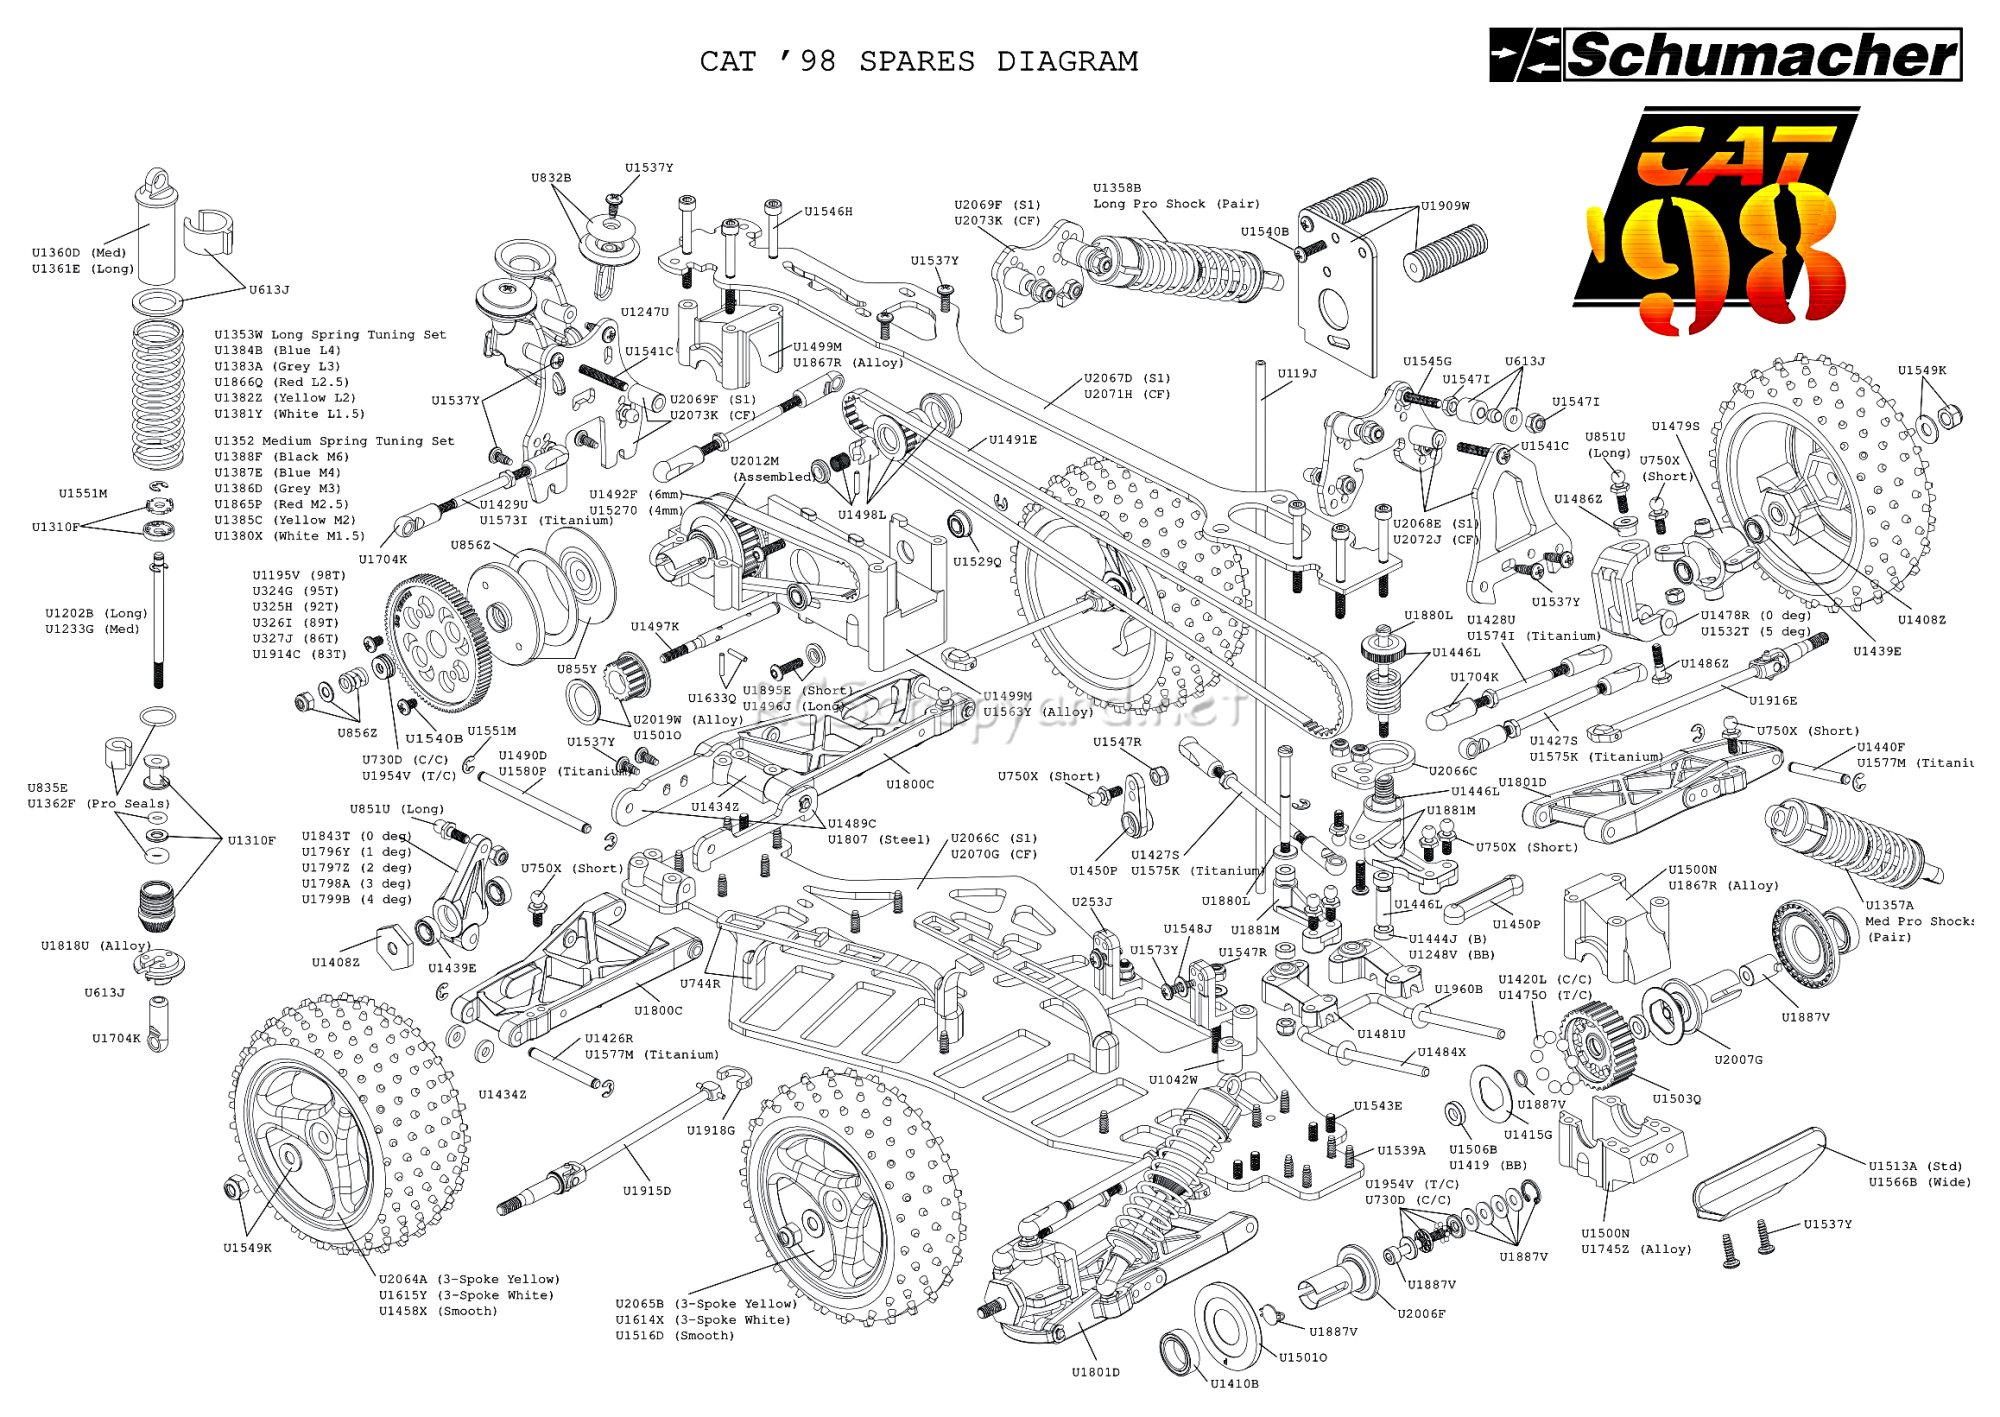 Schumacher - Cat 98 - Exploded View - Page 1